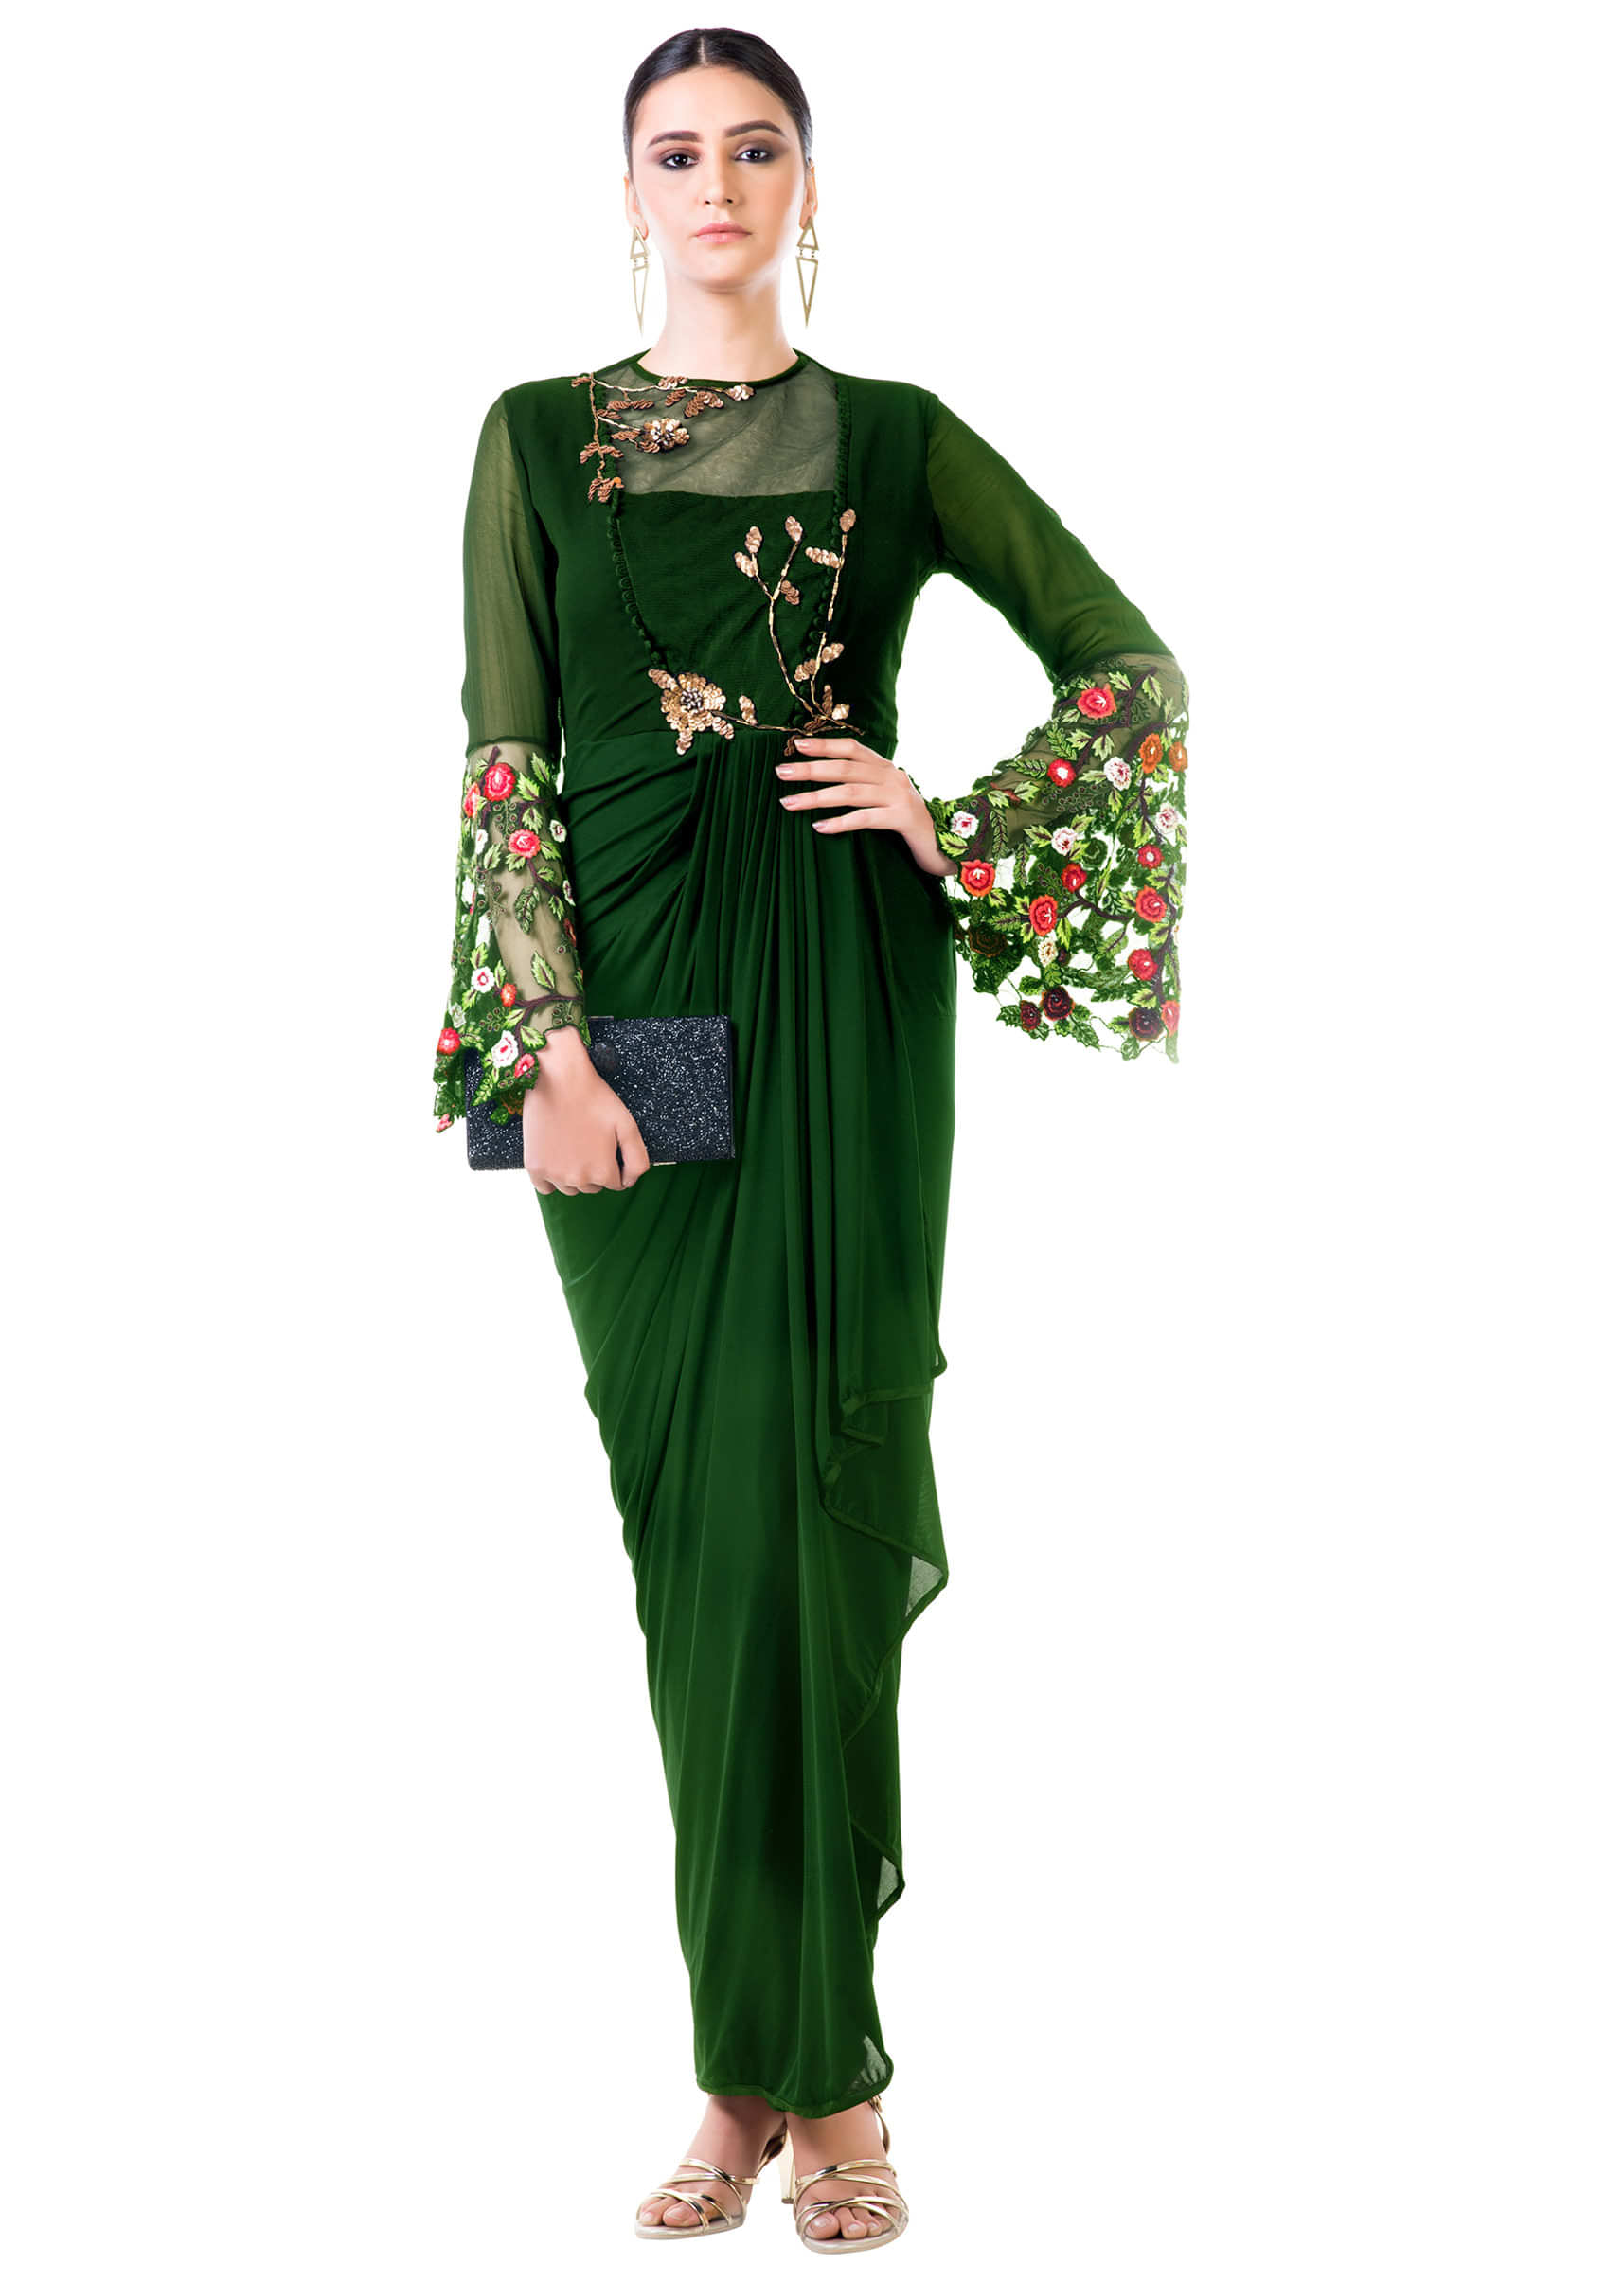 Green Draped Dress With Embroidered Bell Sleeves Online - Kalki Fashion